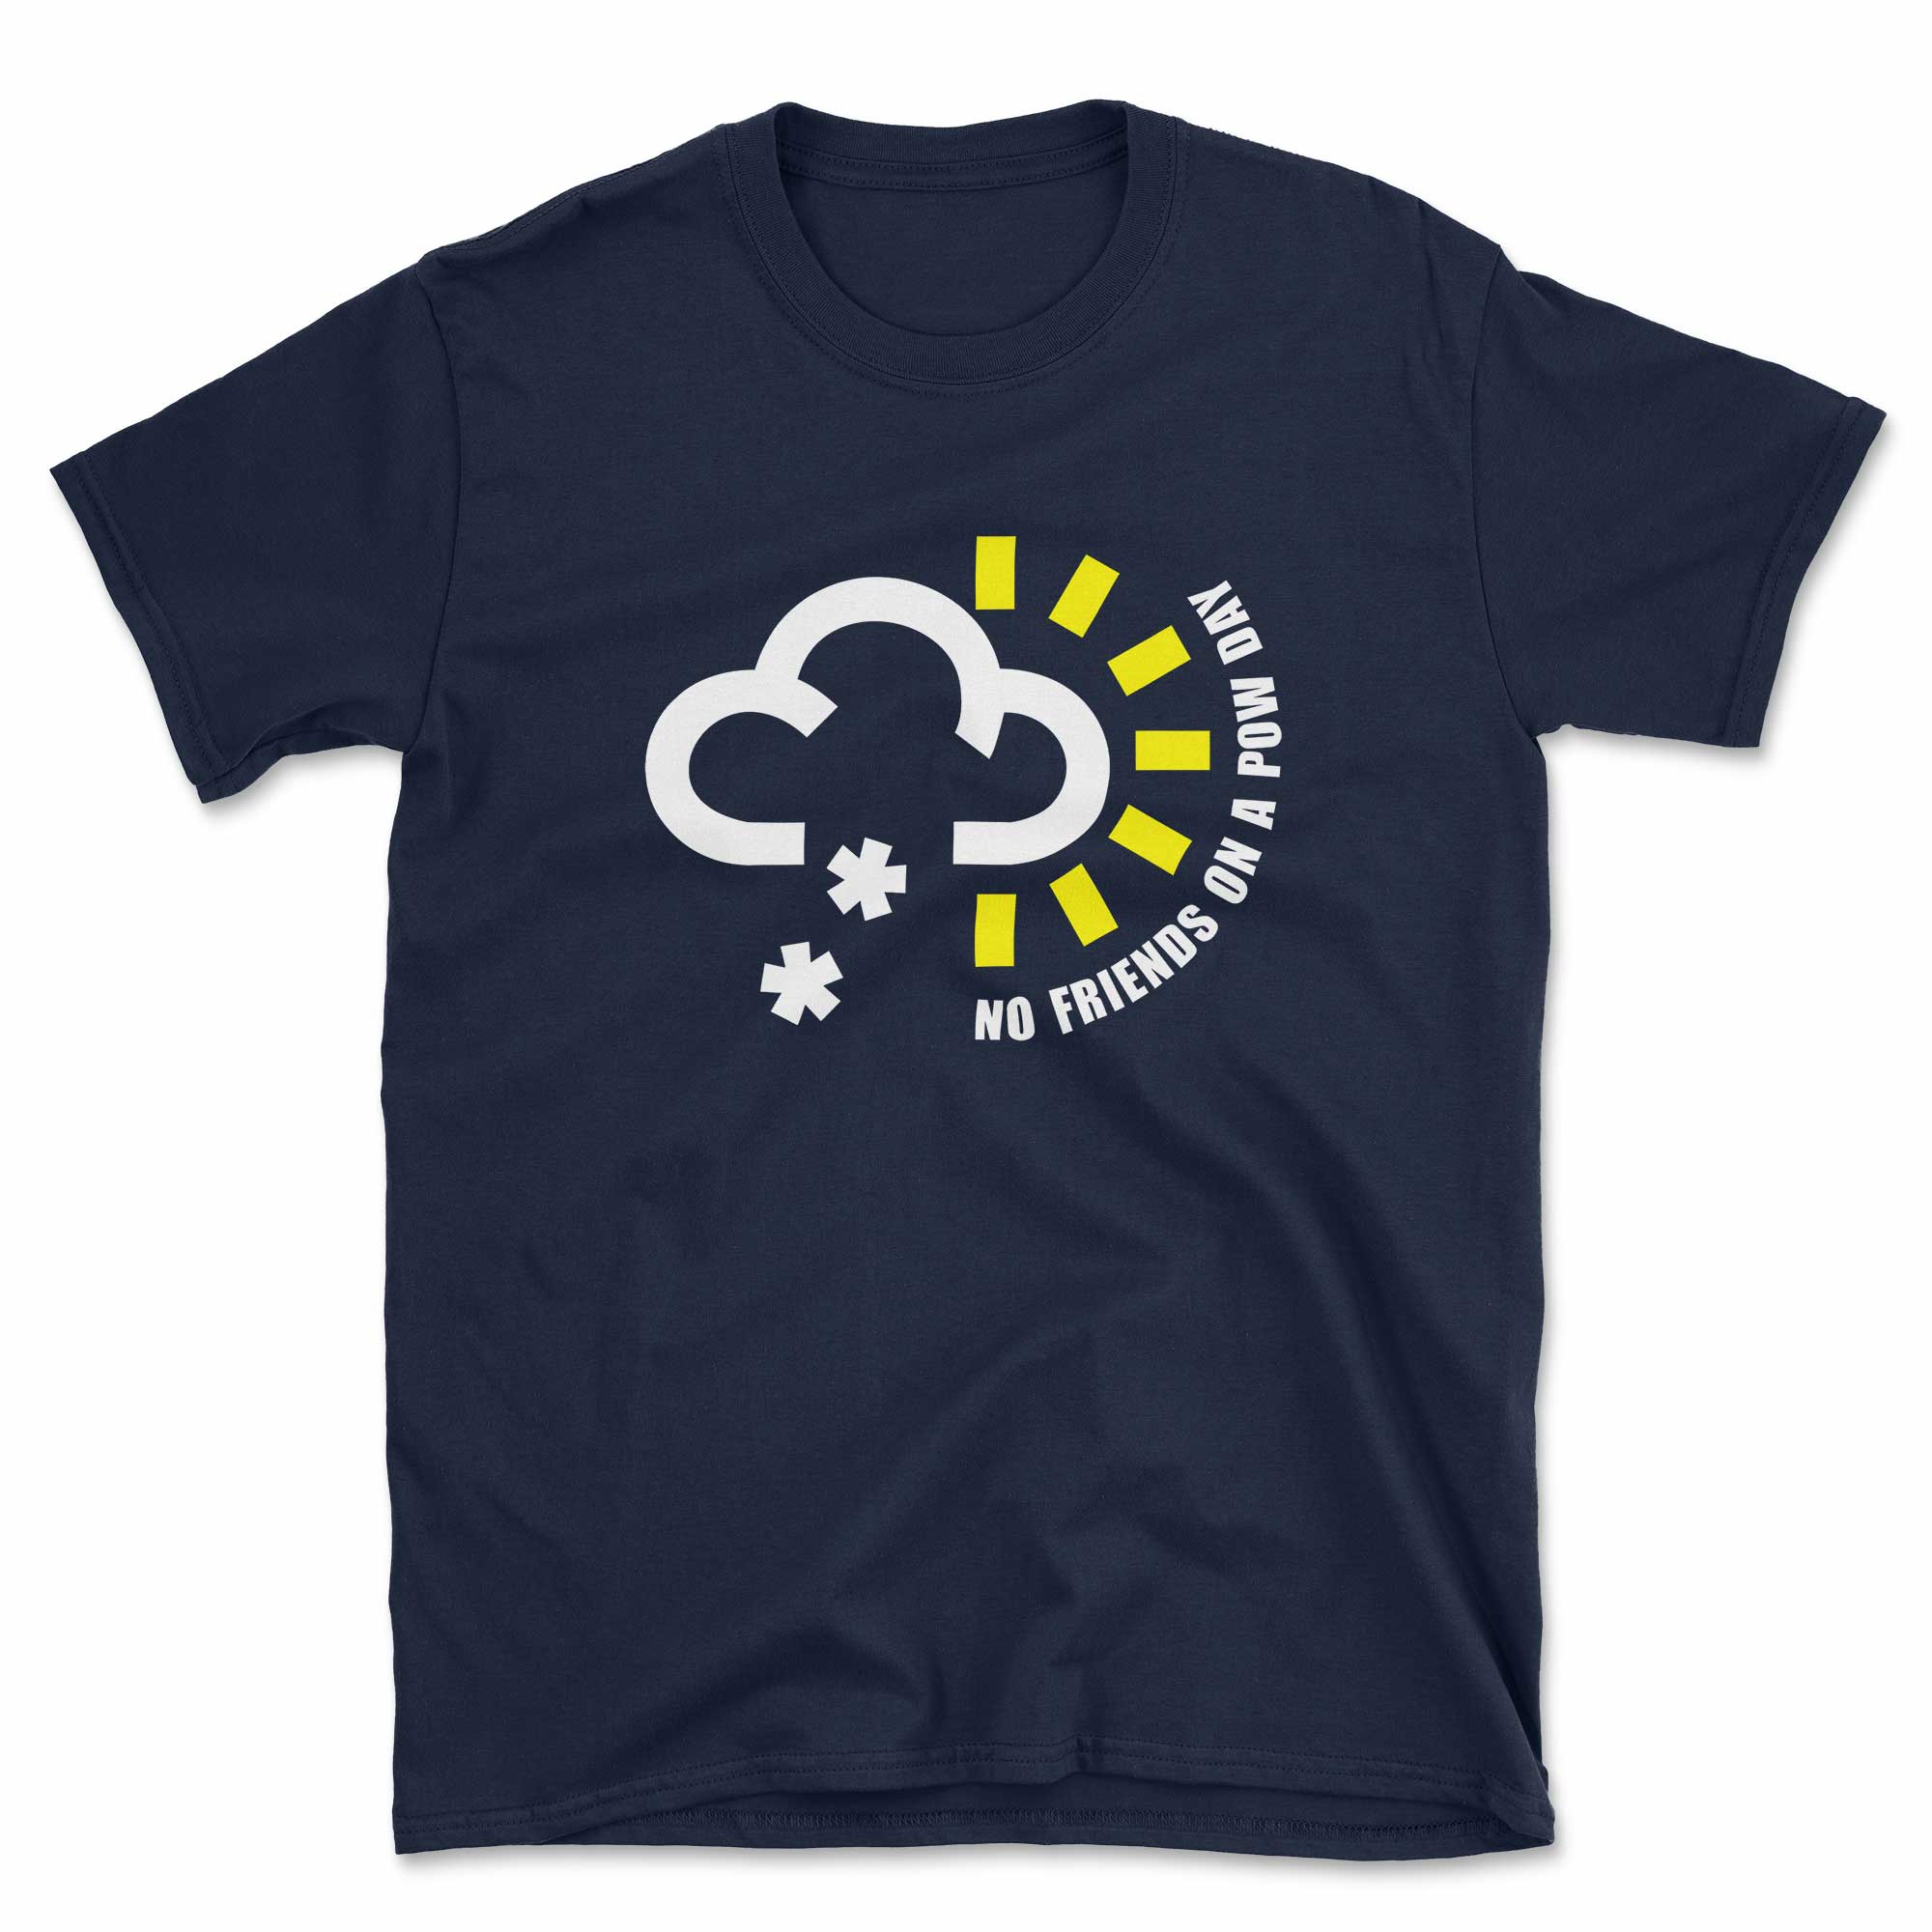 No Friends on a POW Day T-Shirt